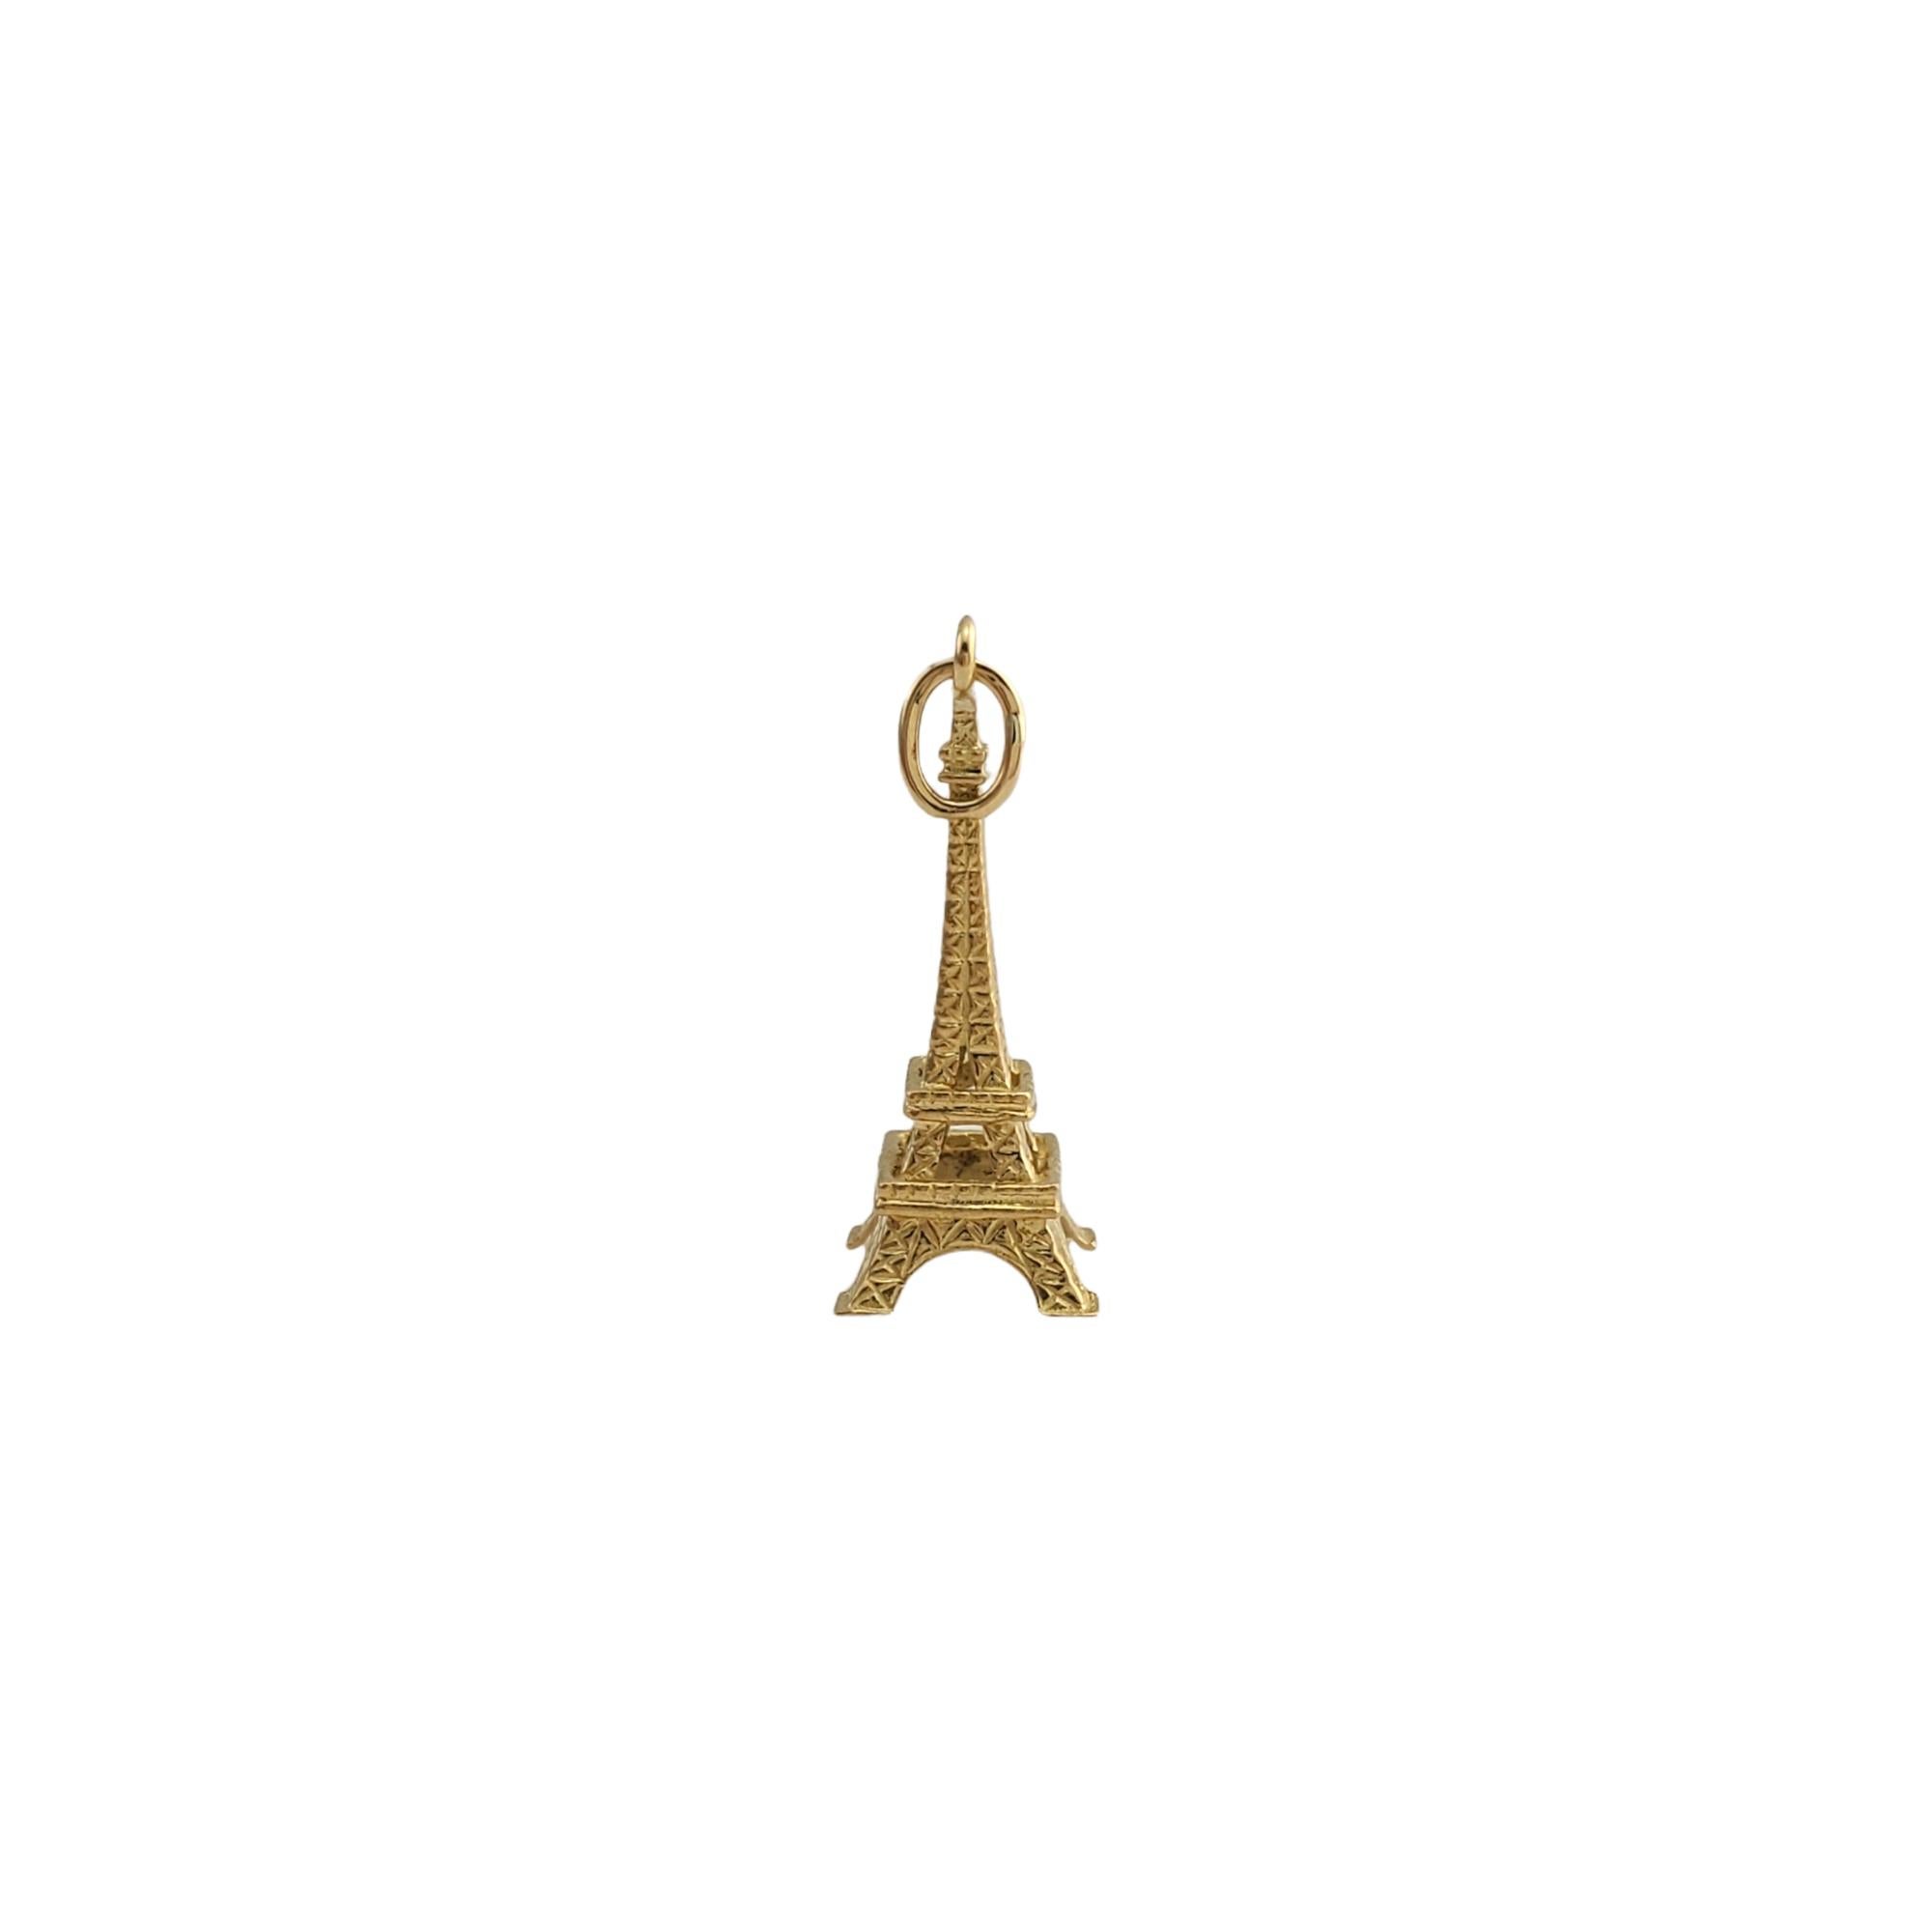 Vintage 18K Yellow Gold Eiffel Tower Charm 

Eiffel for this adorable 18k yellow gold charm! 

Size: 7.56 mm X 24.51mm

Weight:  1.6 gr / 1.0 dwt

Very good condition, professionally polished.

Will come packaged in a gift box and will be shipped